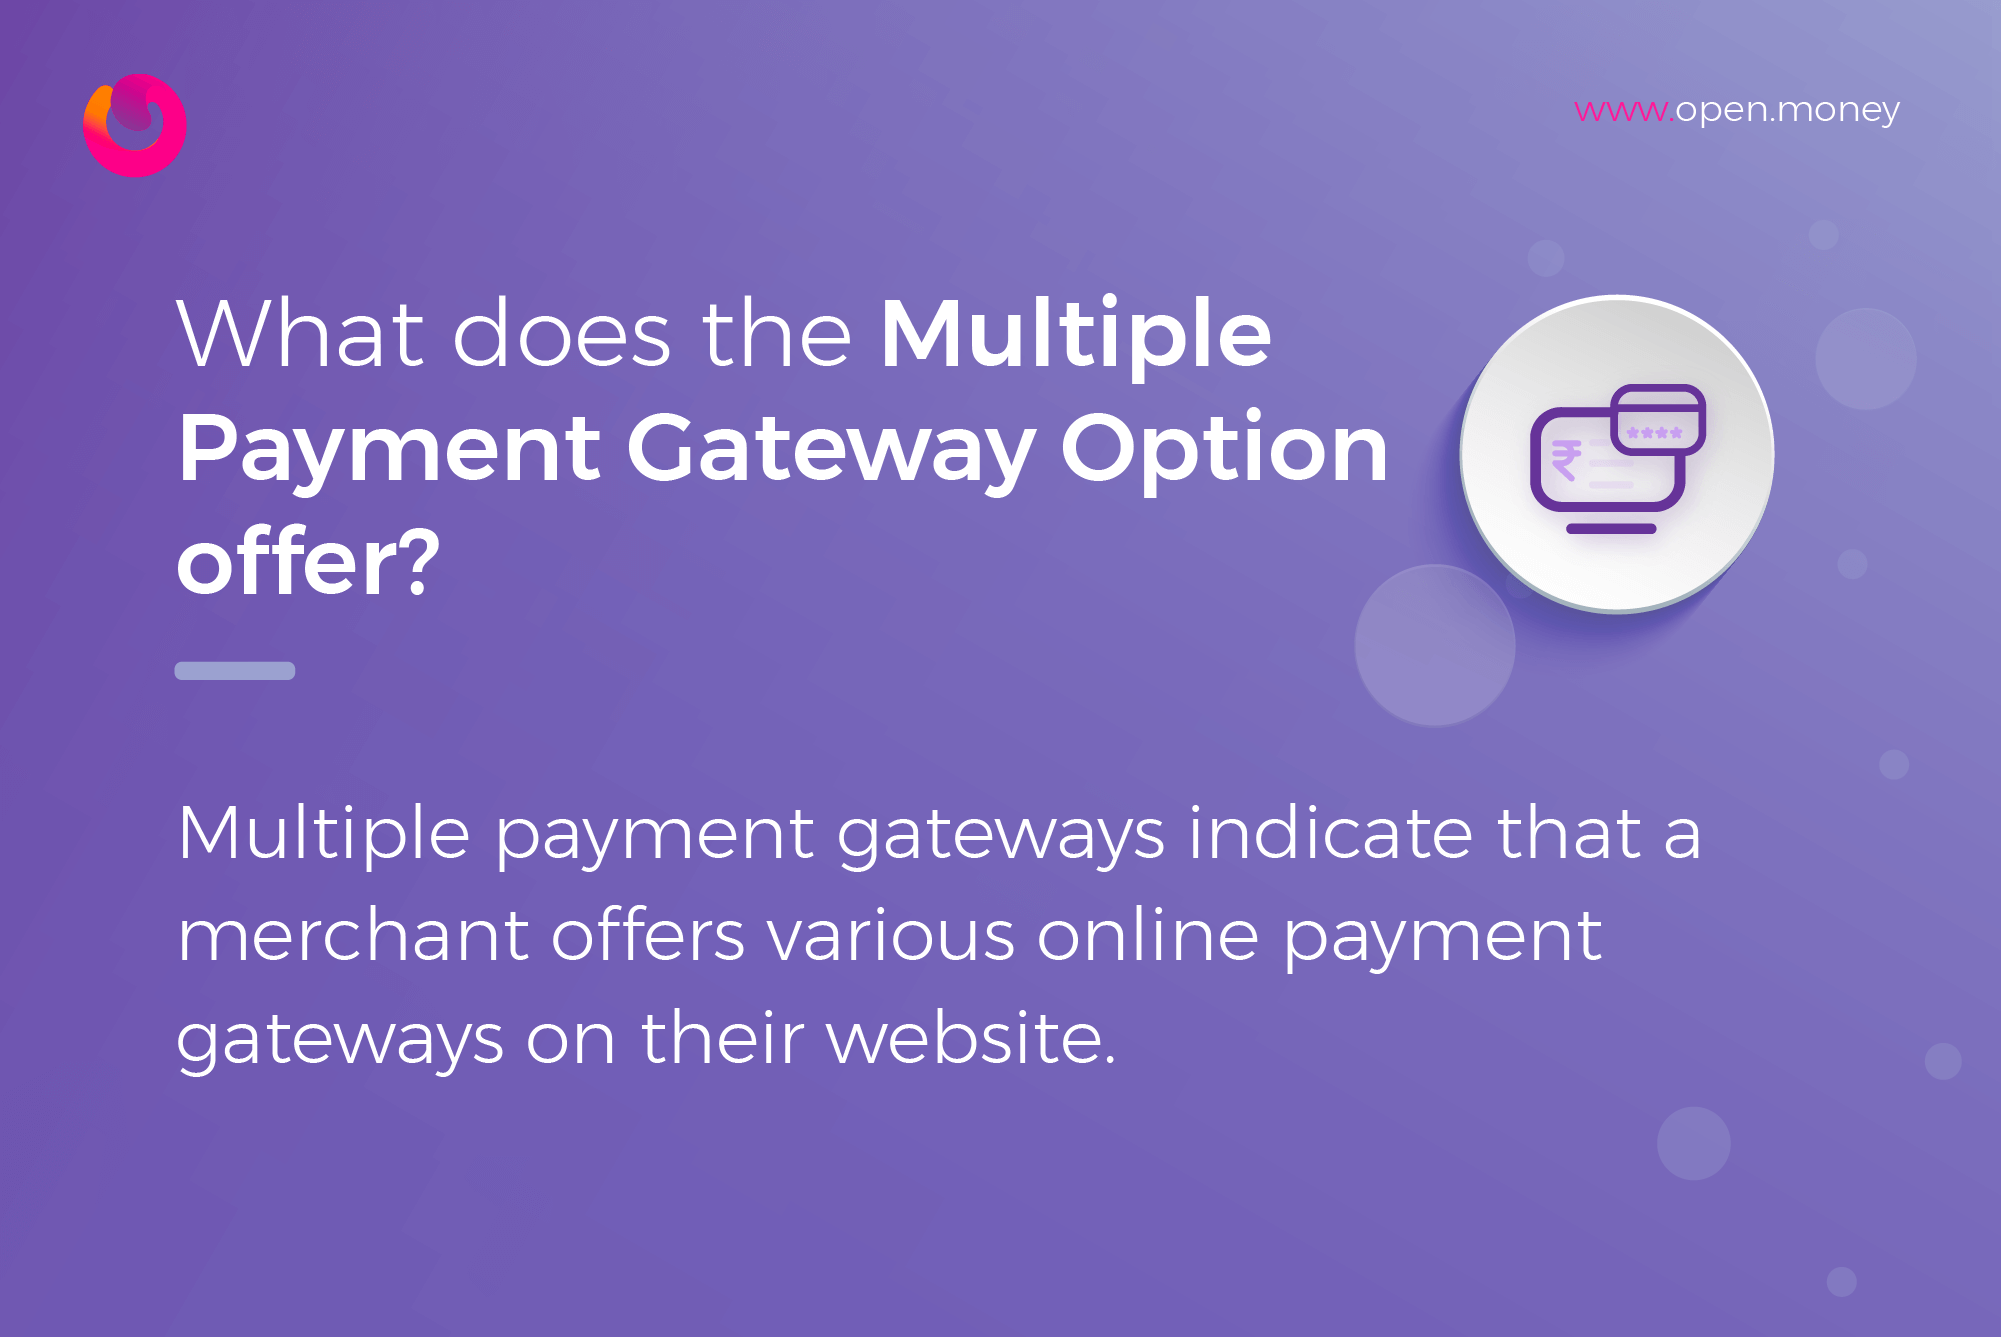 What does the multiple payment gateway option offer?